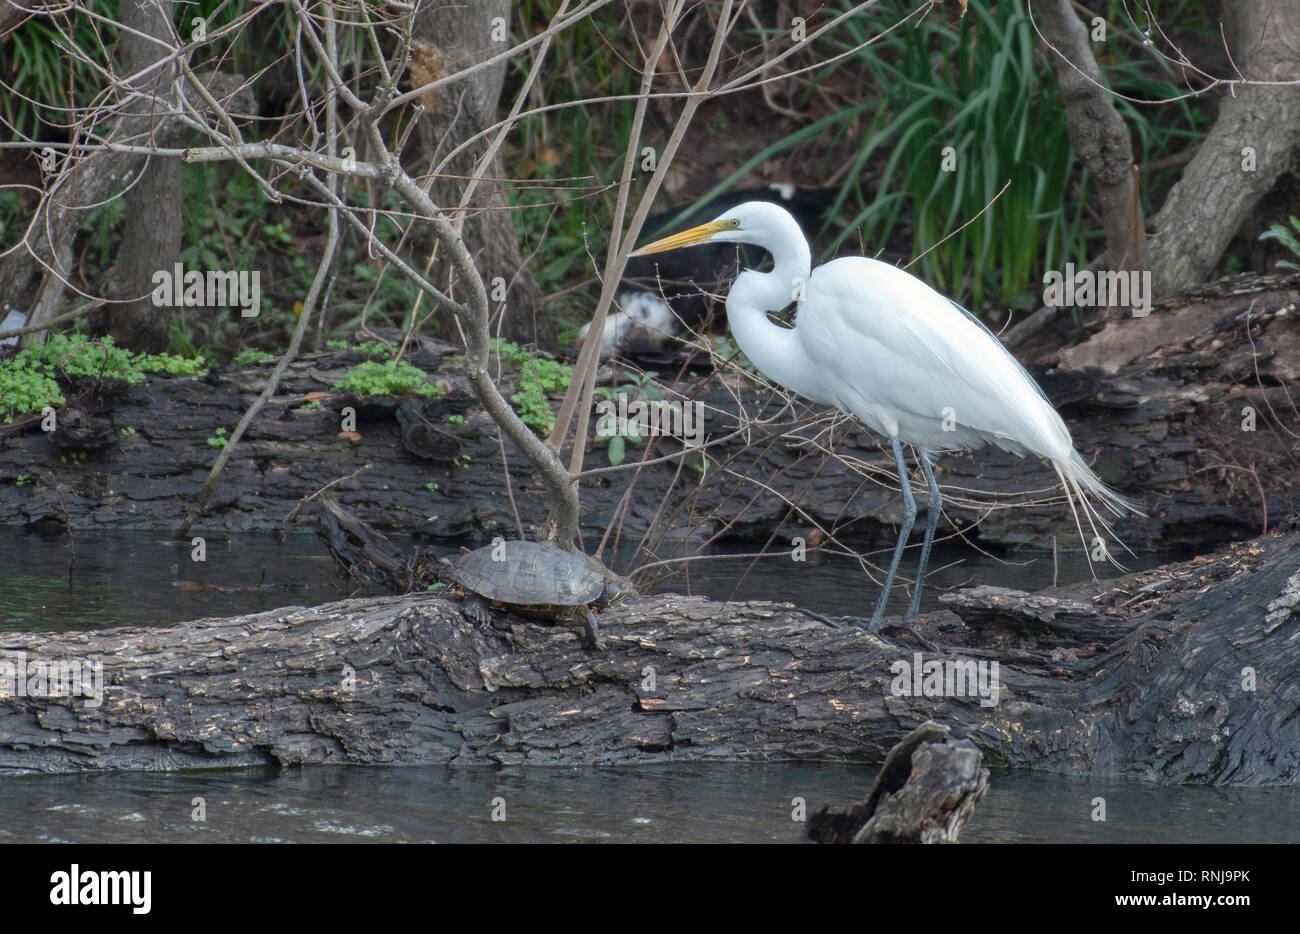 A great egret, Ardea alba, shares a log in a pond with a red-eared slider turtle, Trachemys scripta elegans, in Shreveport, La., U.S.A. Stock Photo